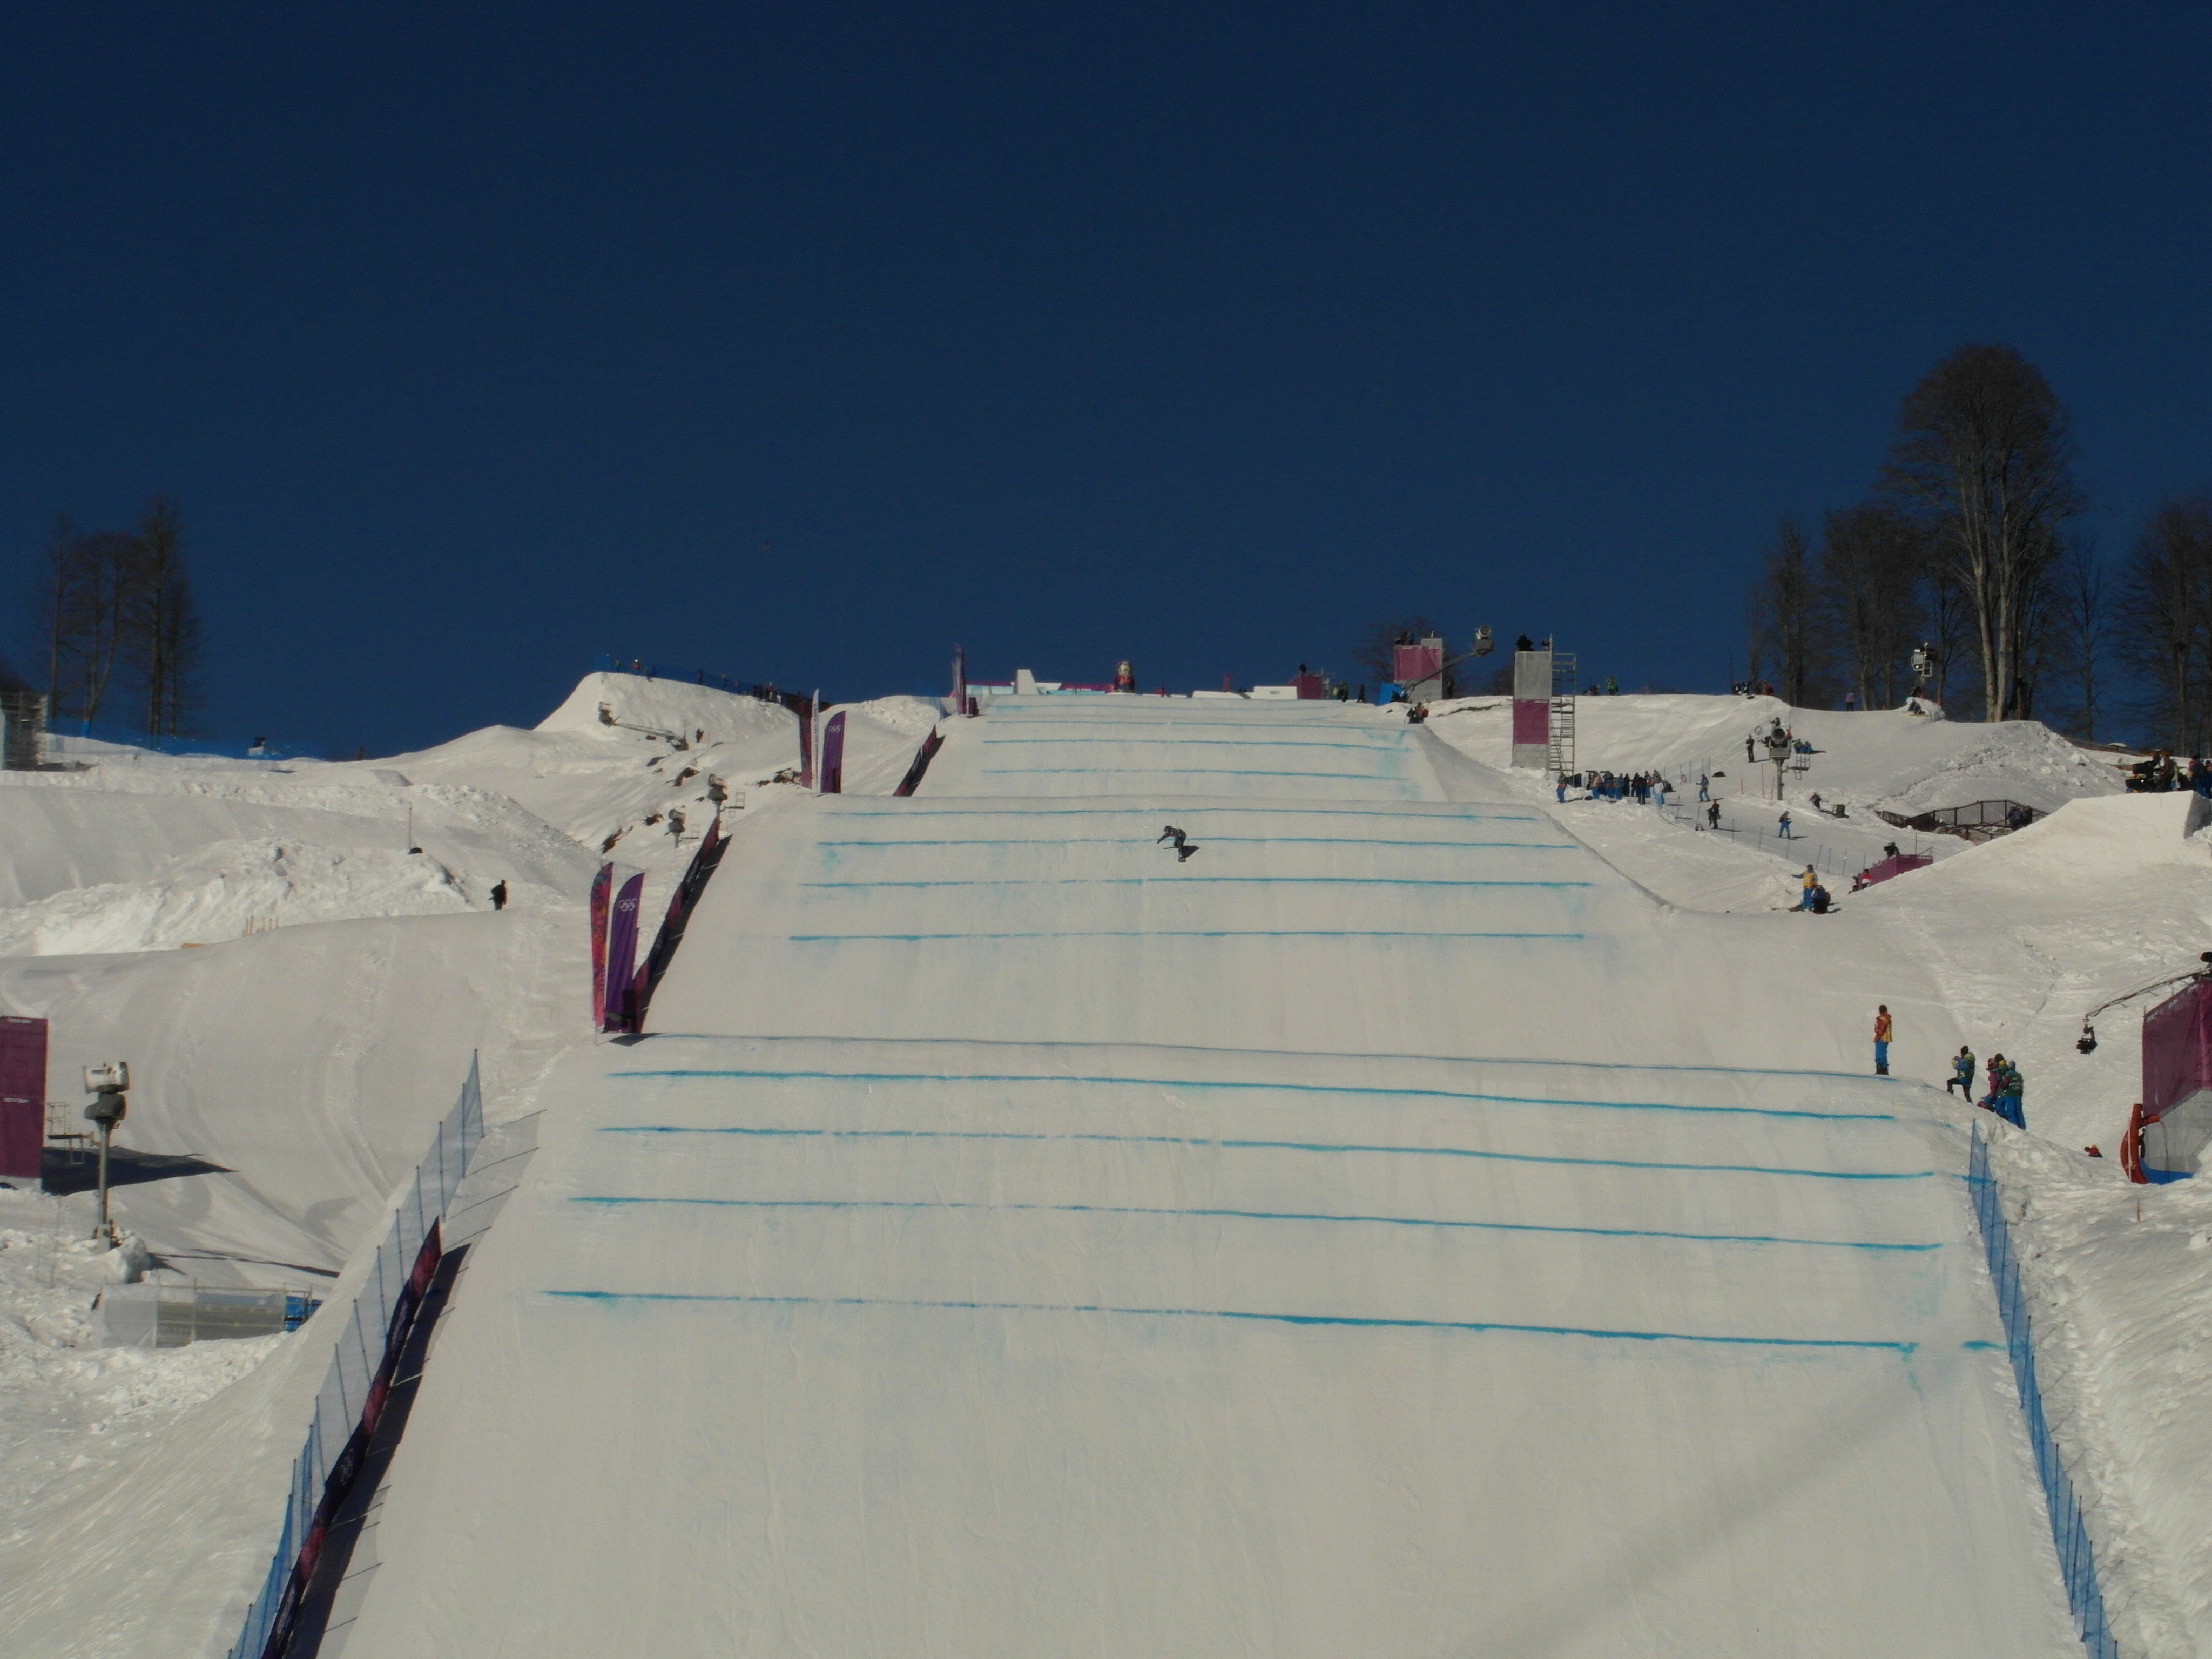 Boarder on Course @ Slopestyle - 2